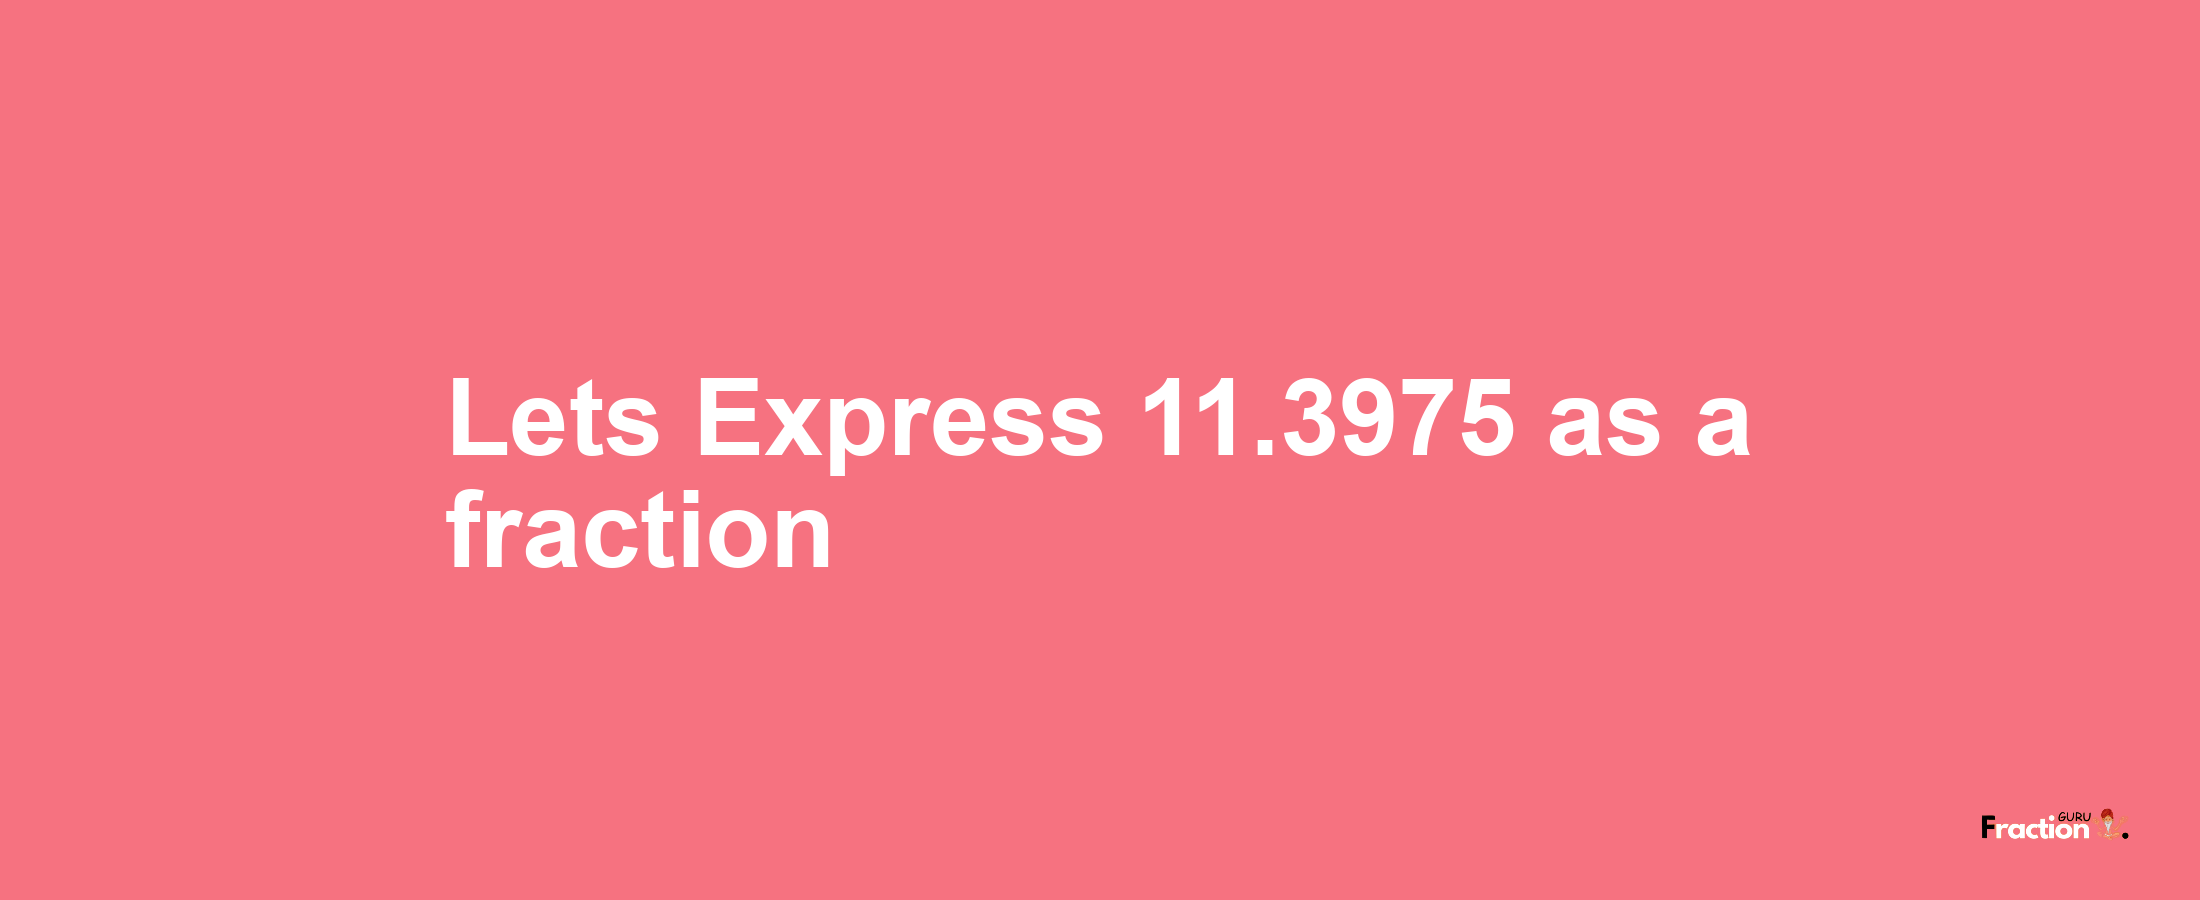 Lets Express 11.3975 as afraction